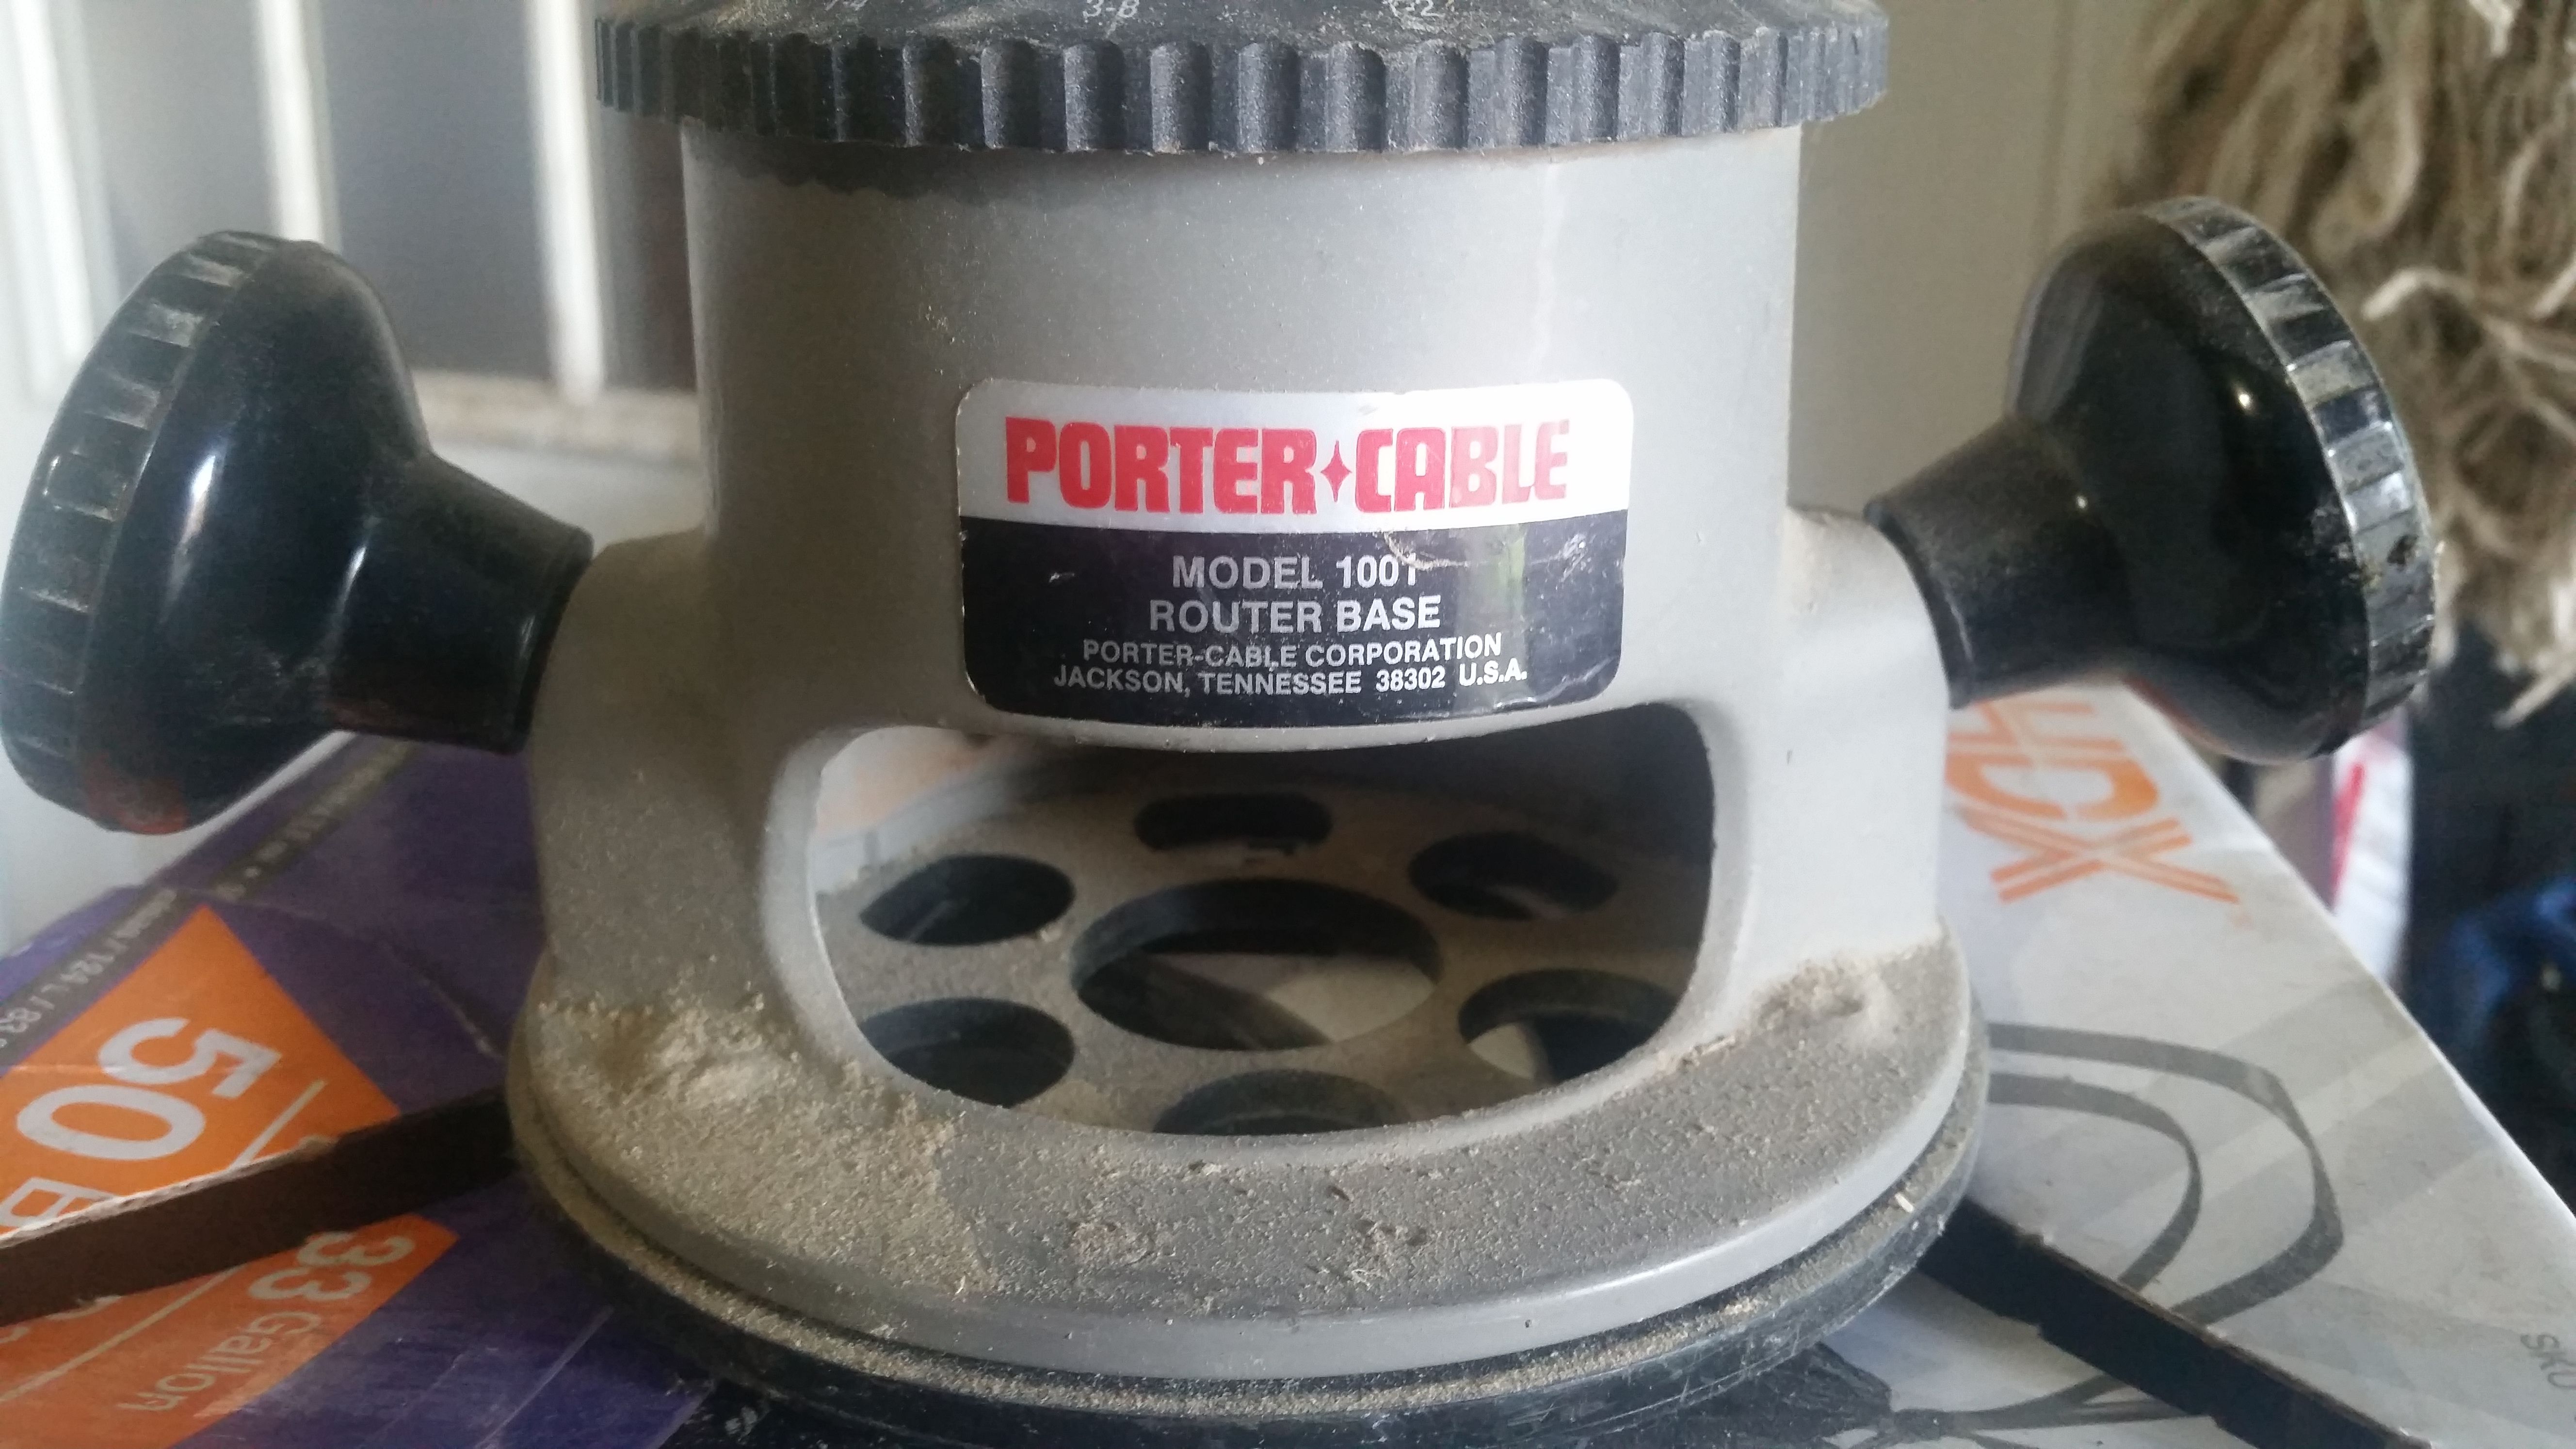 Porter cable router base's